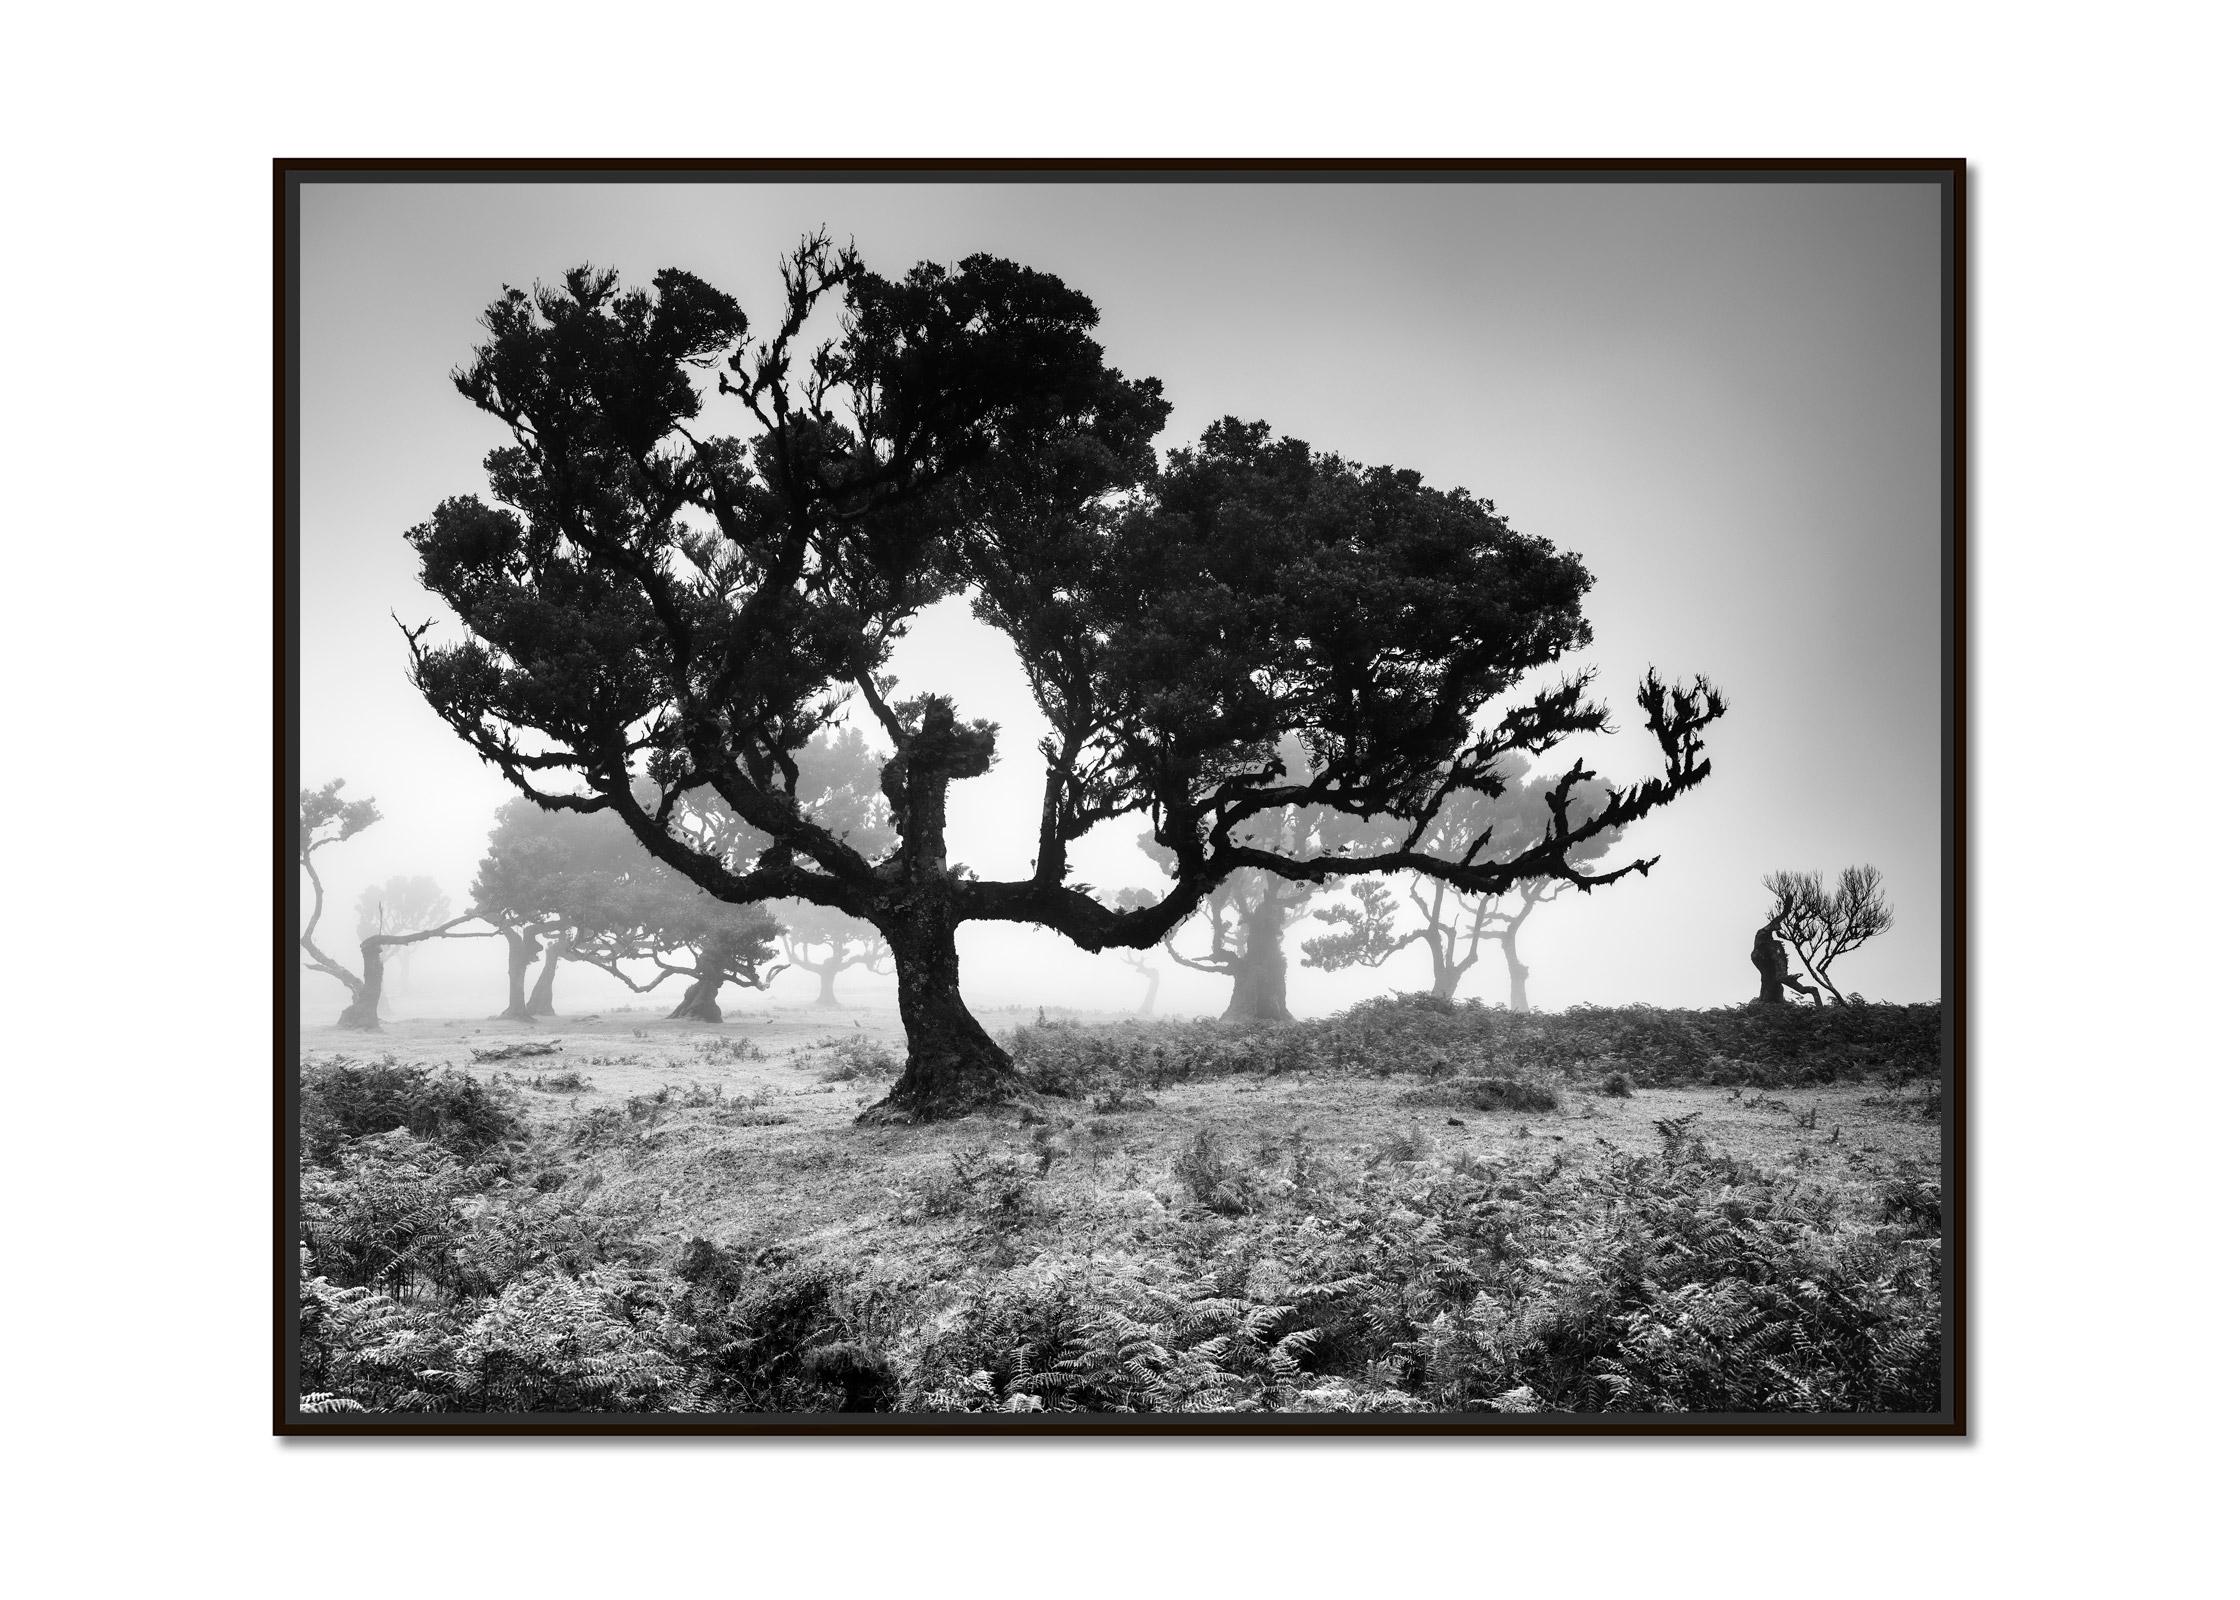 Ancient Laurisilva Forest, Tree, Portugal, black and white landscape photography - Photograph by Gerald Berghammer